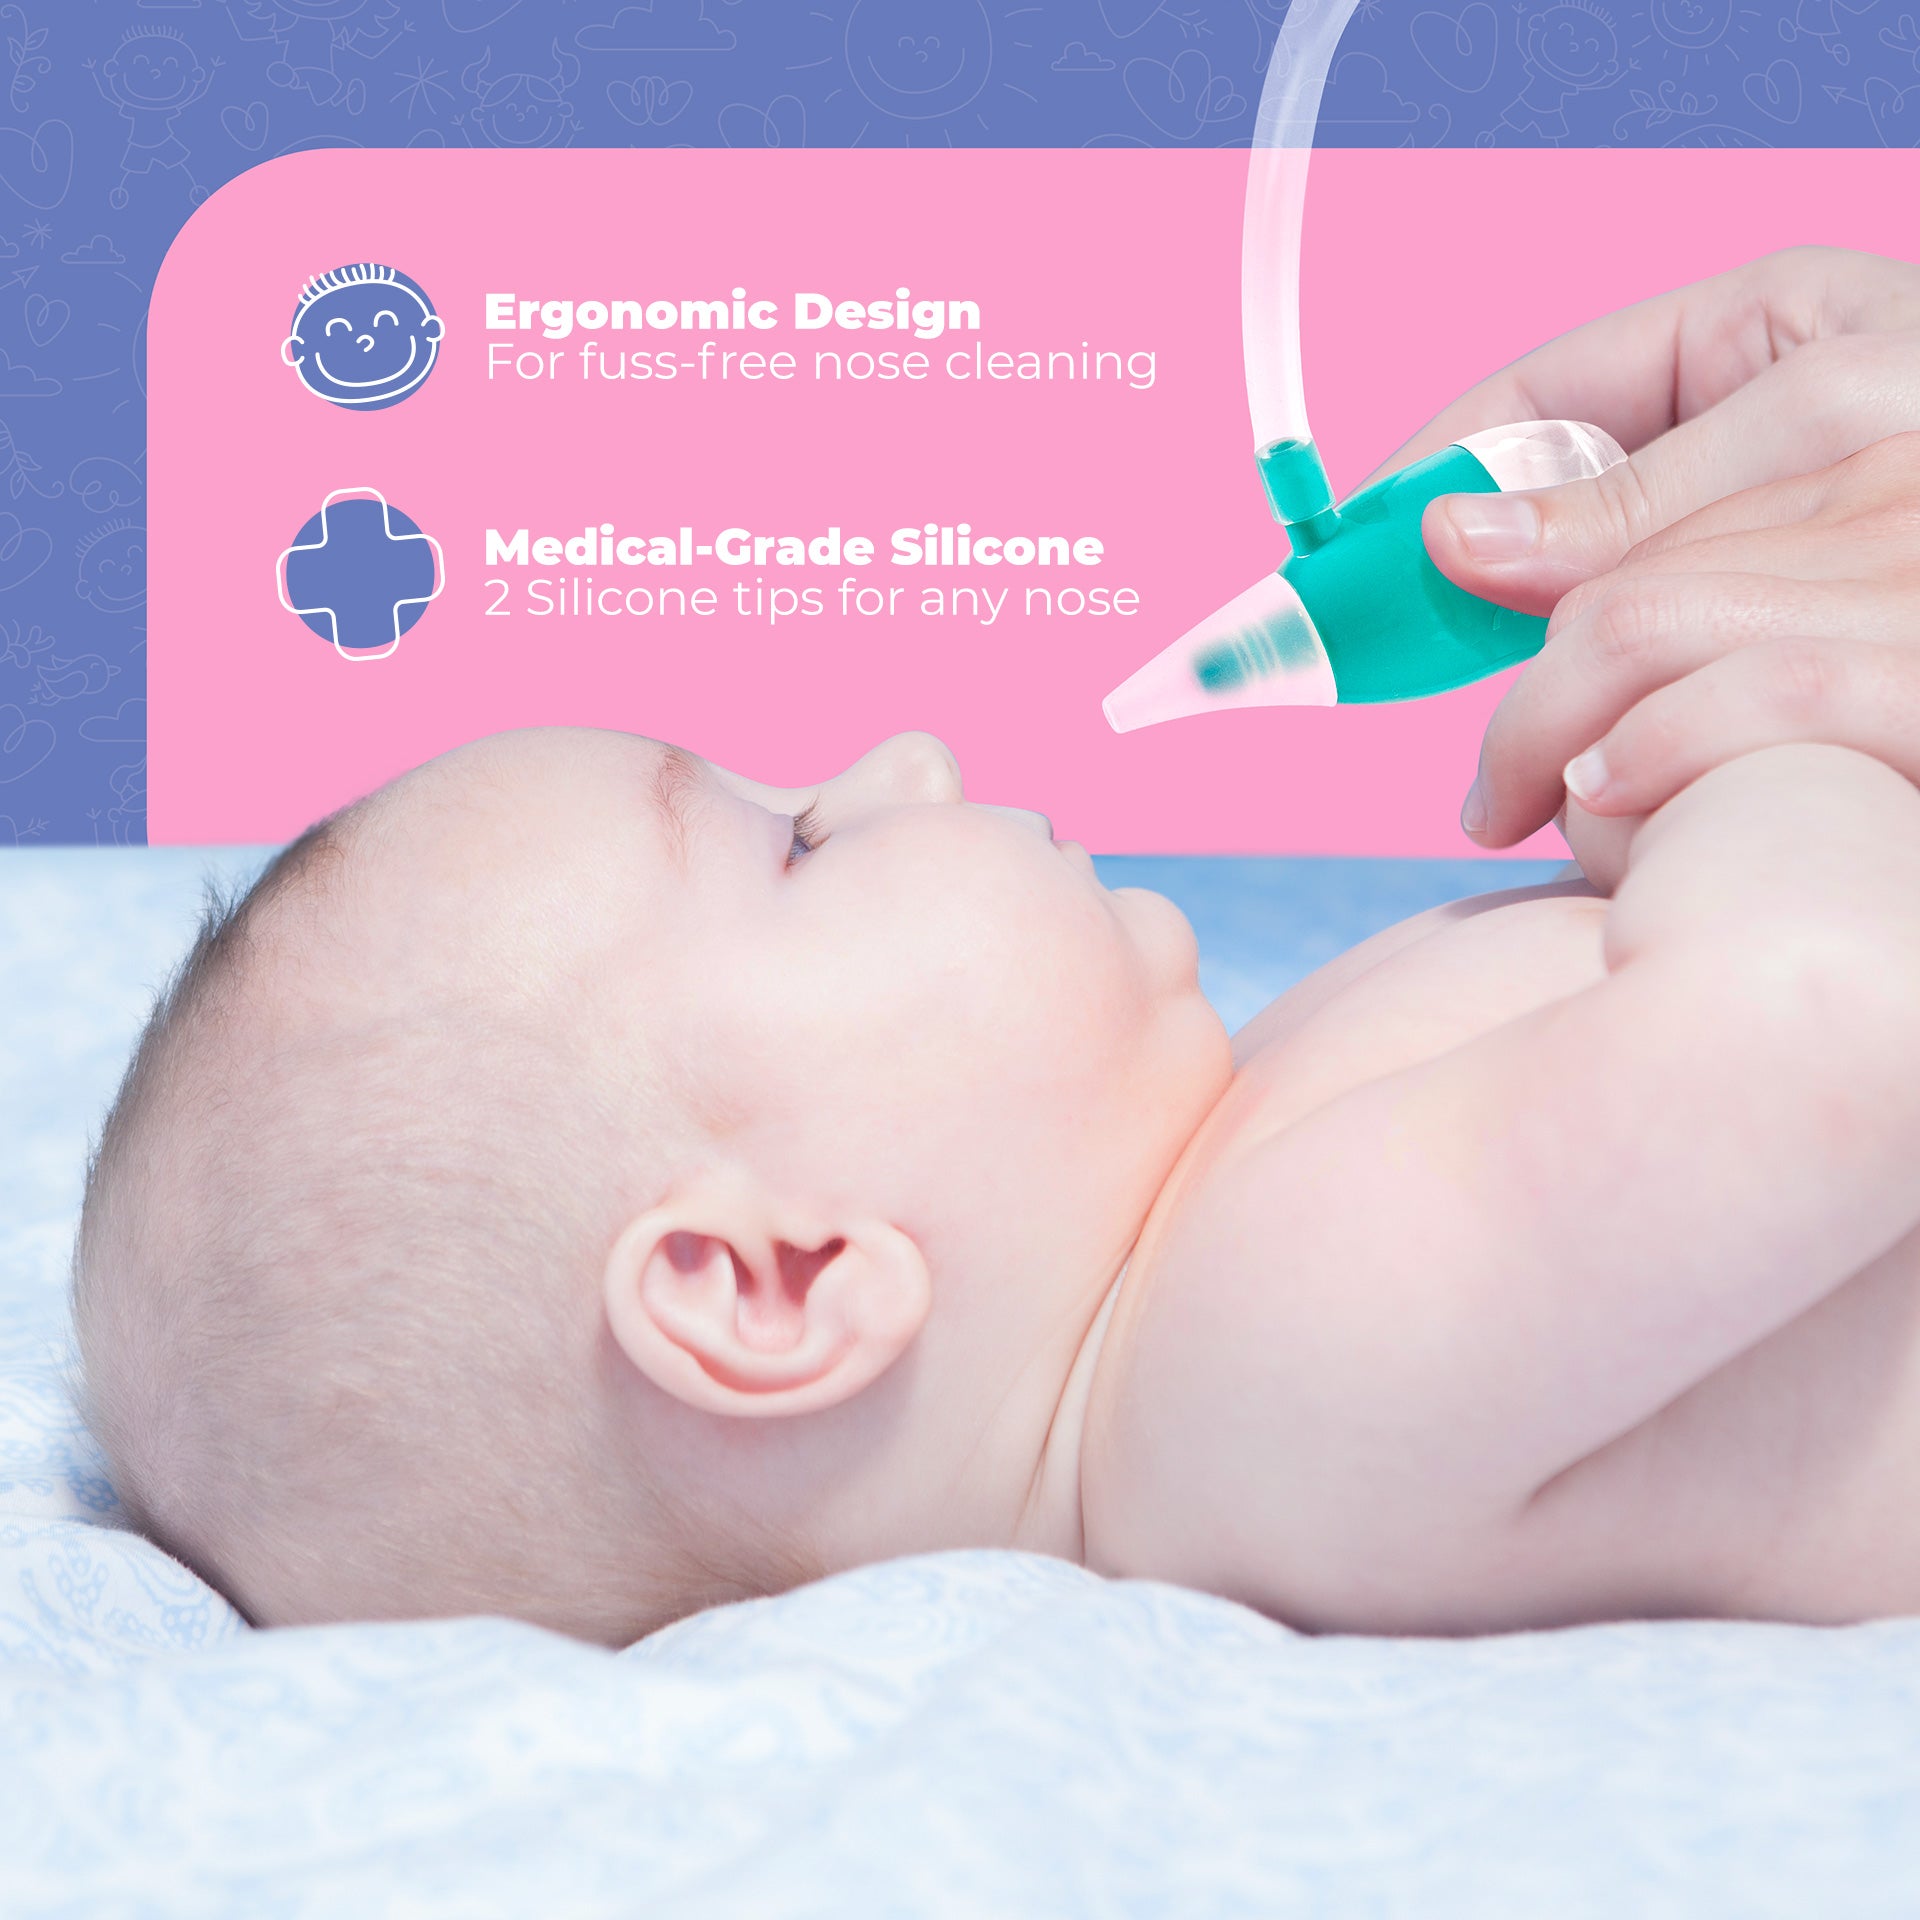 OCCObaby Baby Nasal Aspirator Lifestyle Image Retouching for Amazon and ECommerce Carousel Product Image Design by Scott Luscombe Creatibly